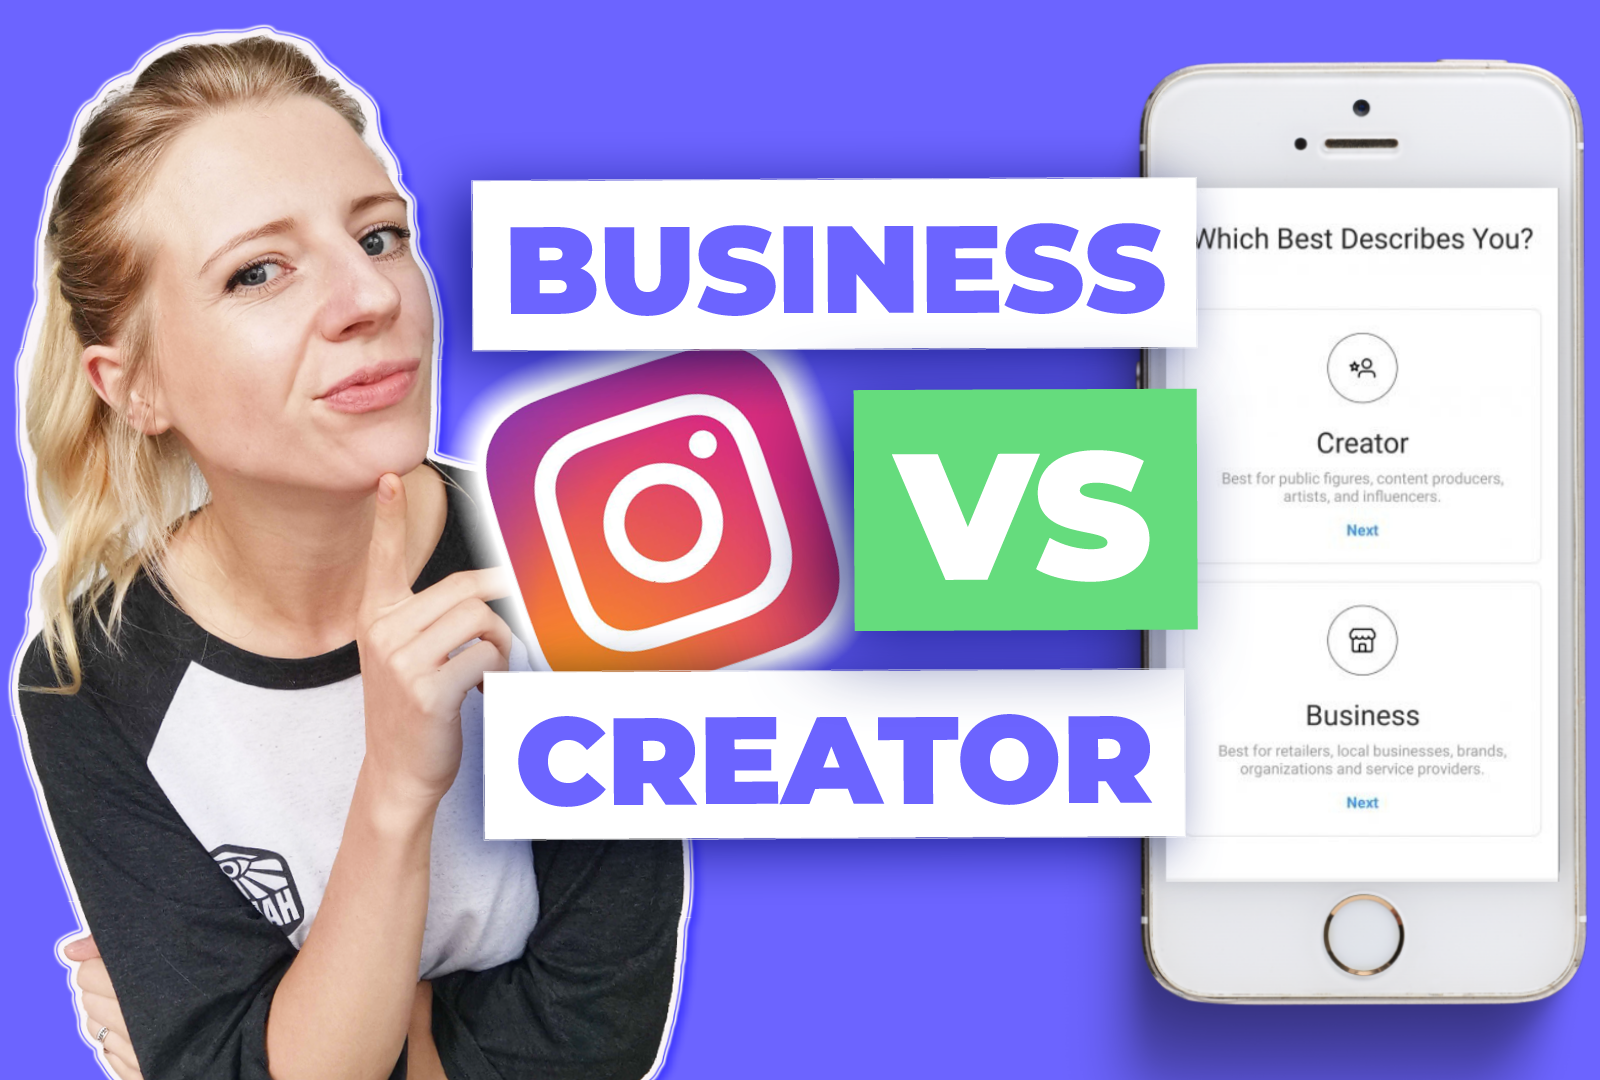 Instruere Emuler kaste støv i øjnene What is the difference between a business account and a creator account on  Instagram? The best pick! | Display Purposes Blog